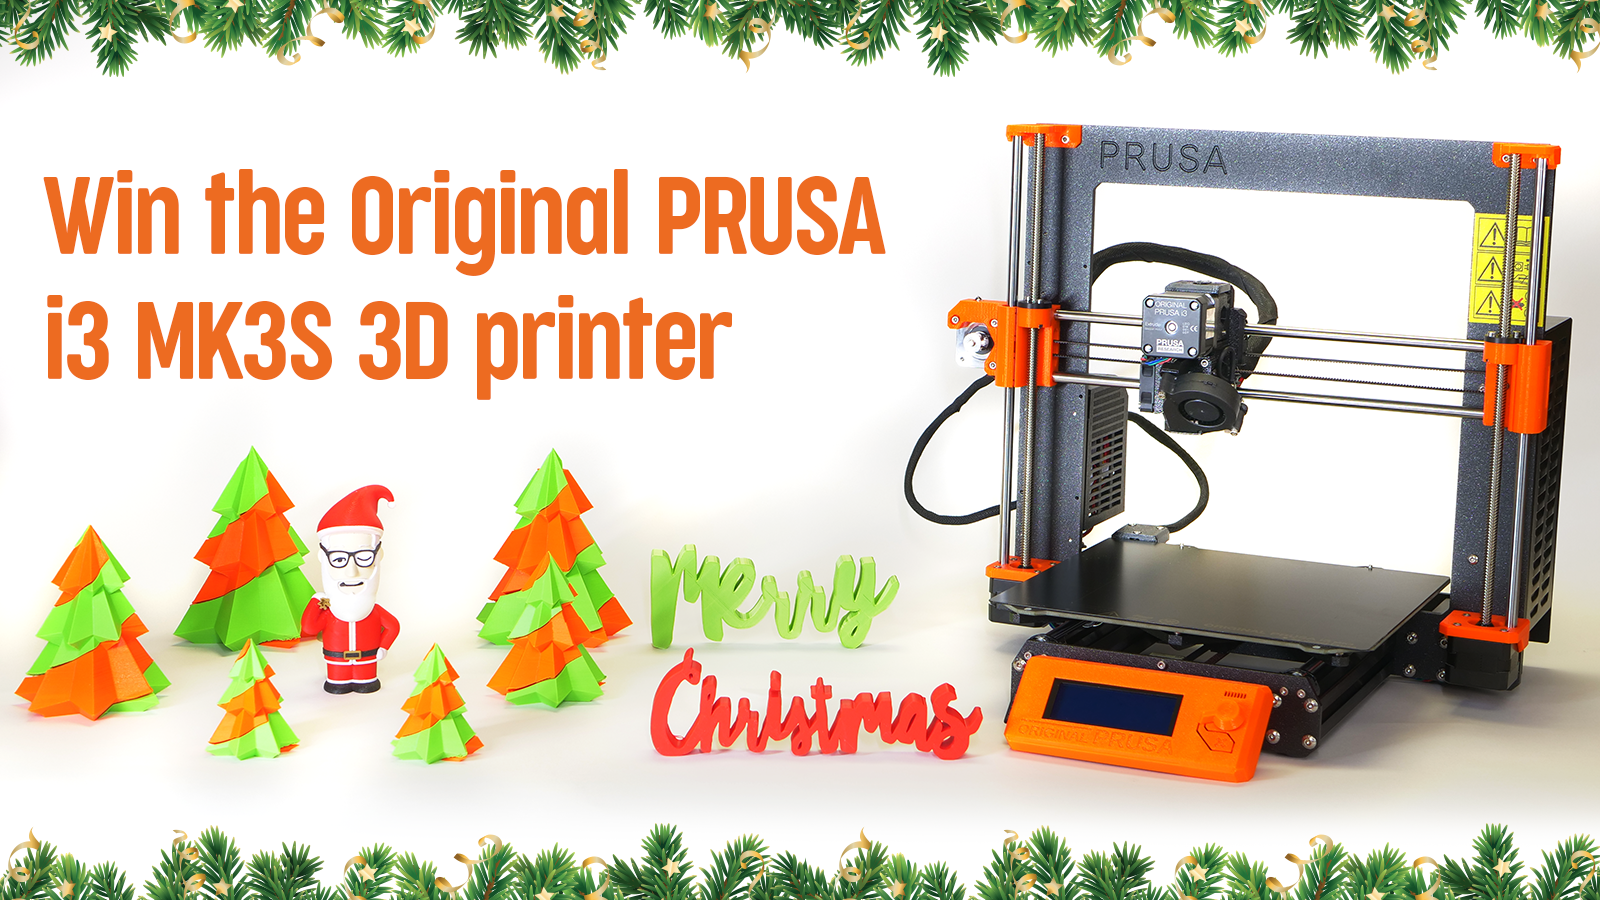 Another 15 useful things to print during a pandemic (announcing results of  the 2nd part of our designer contest) - Original Prusa 3D Printers